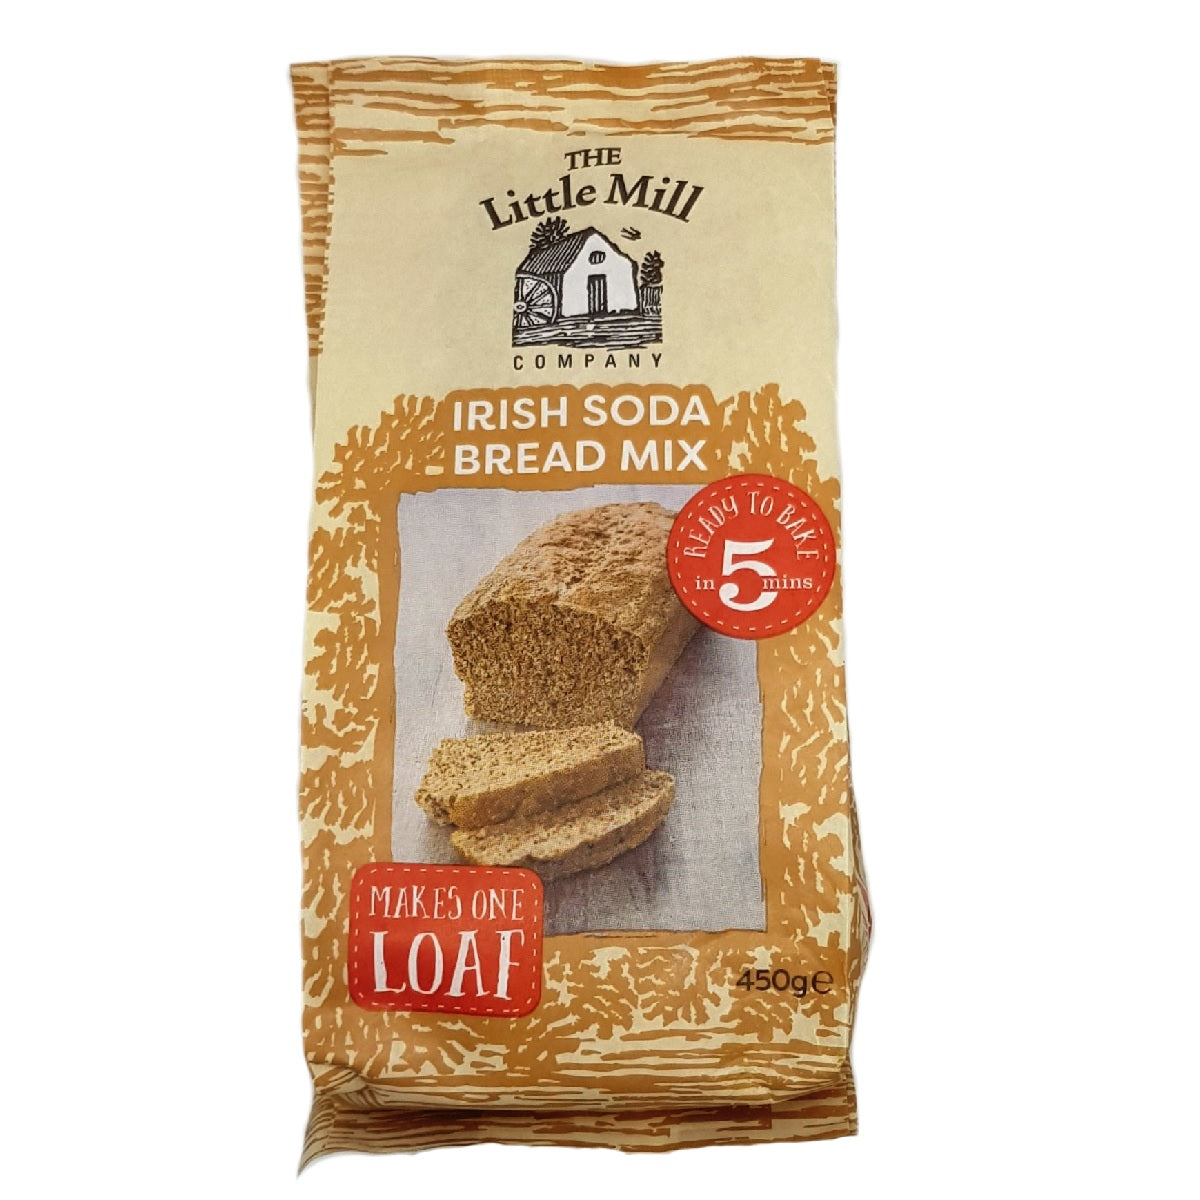 The Little Mill Company Brown Bread Mix 450g